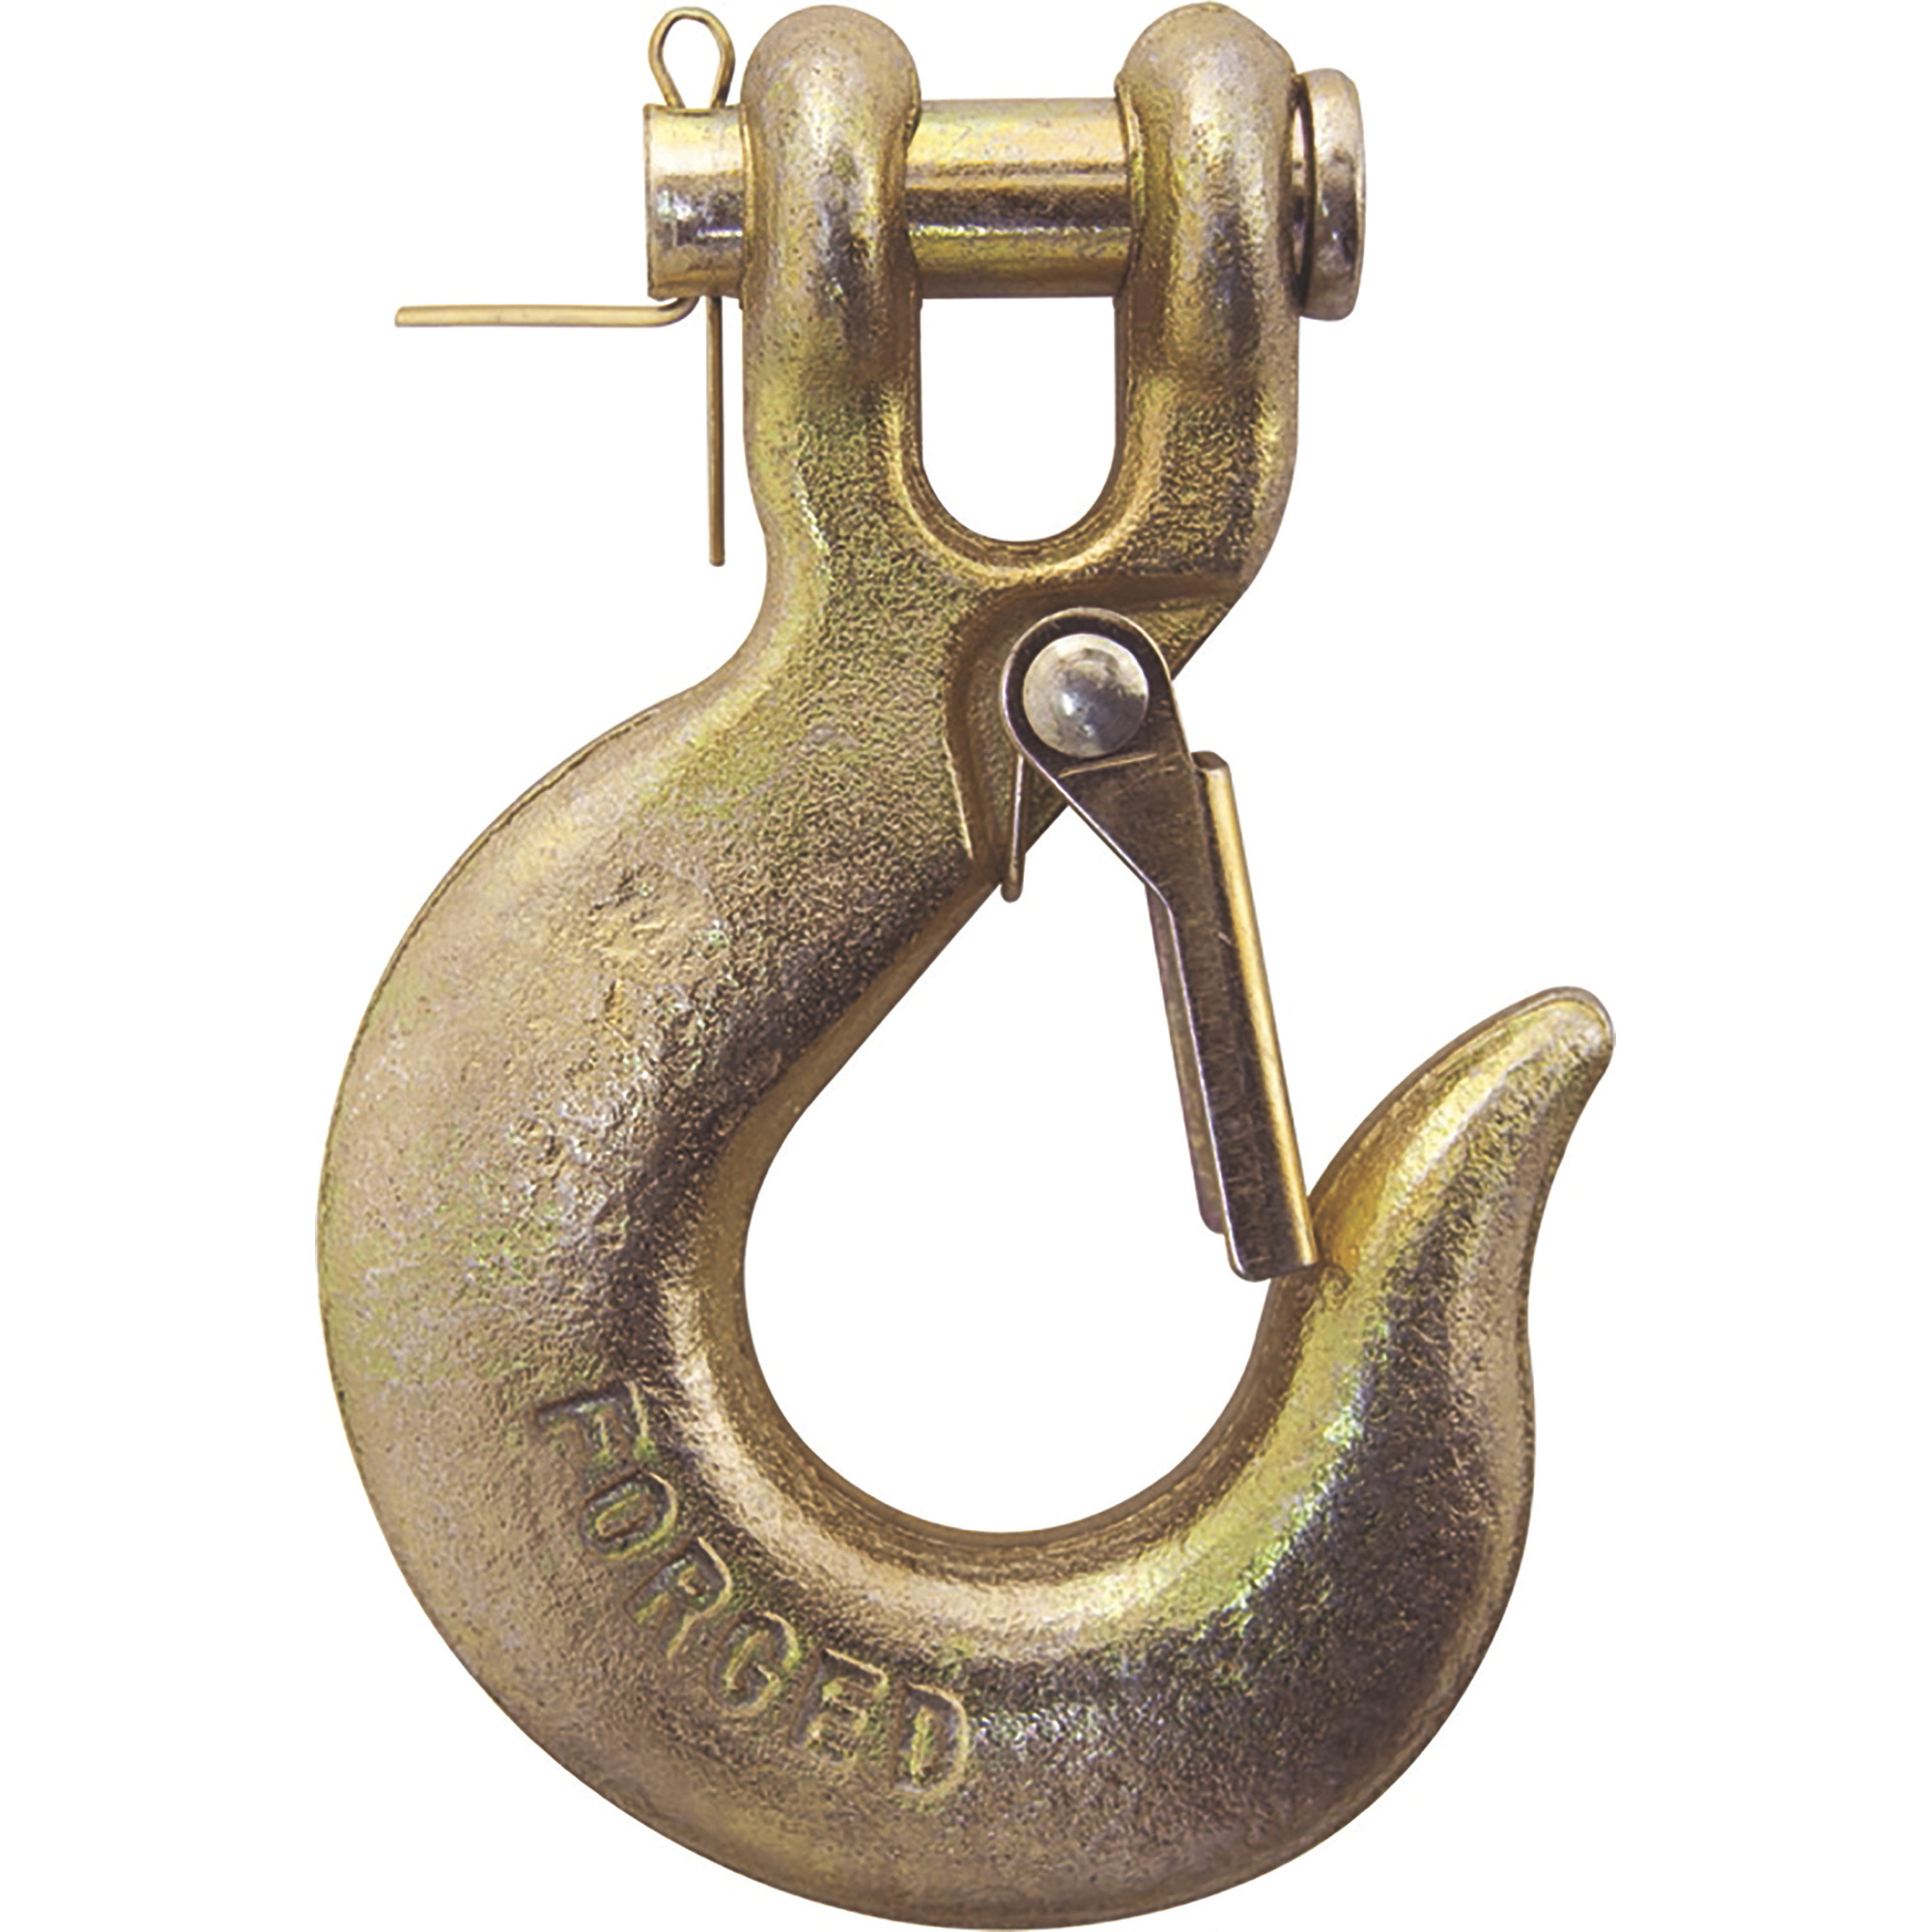 Mibro 3/8Inch GR70 Clevis Slip Hook with Latch, Model 237360